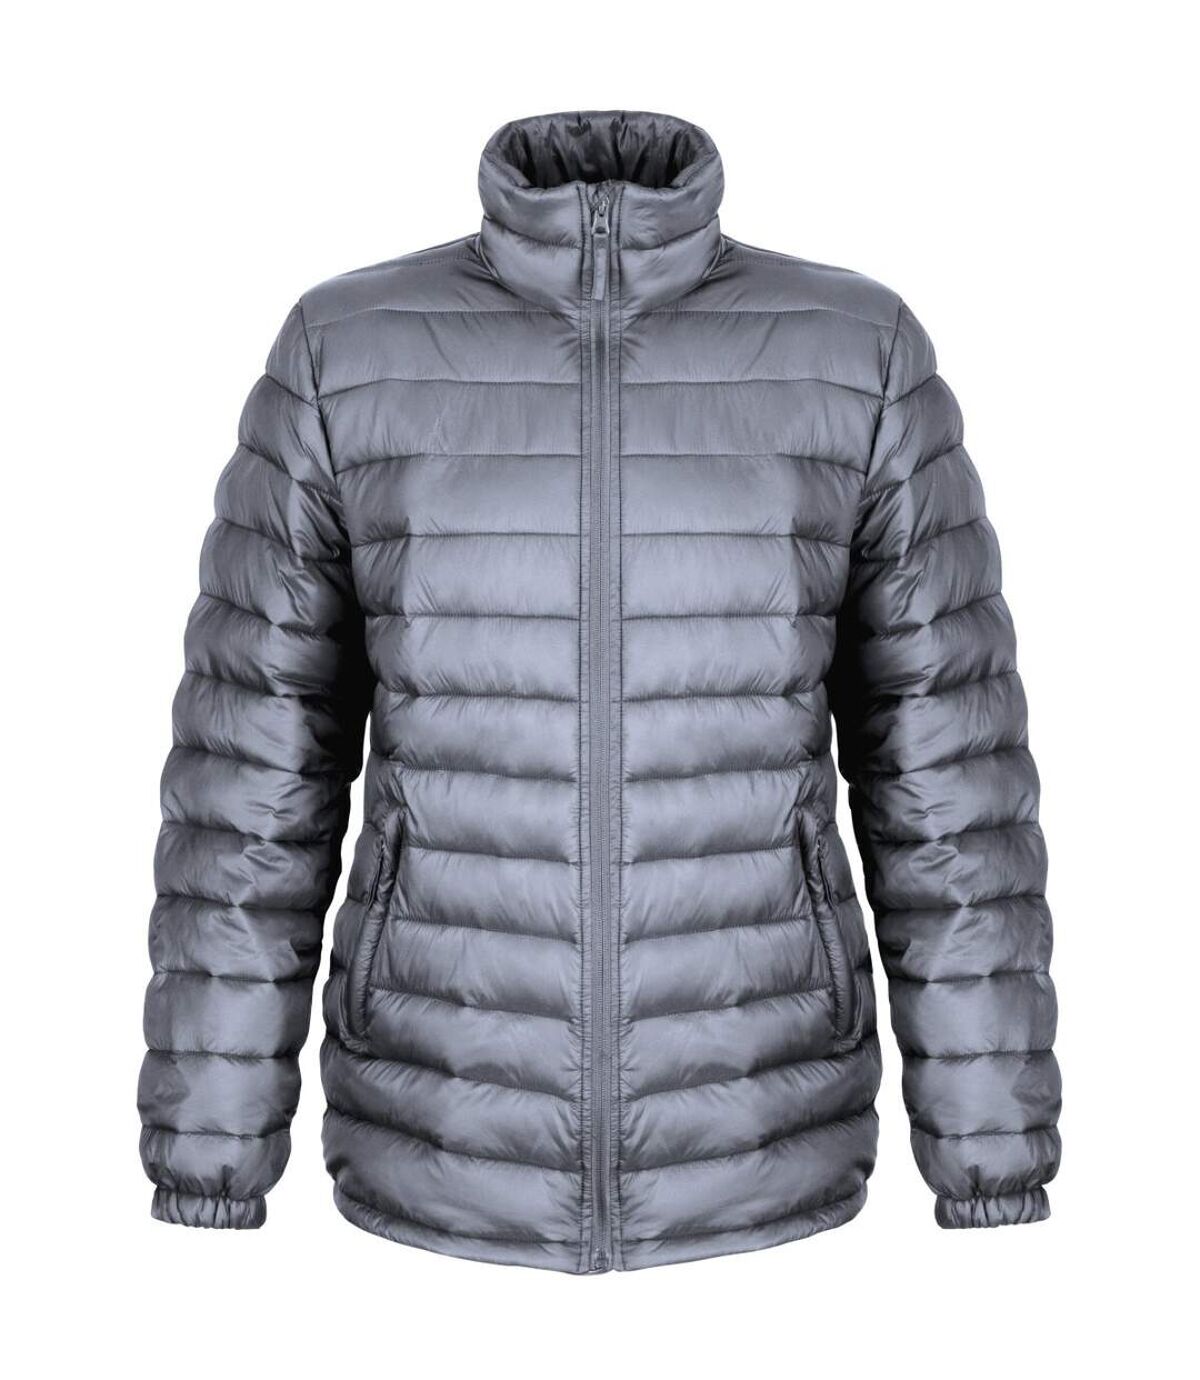 Result Ladies/Womens Ice Bird Padded Jacket (Water Repellent & Windproof) (Frost Gray) - UTBC2047